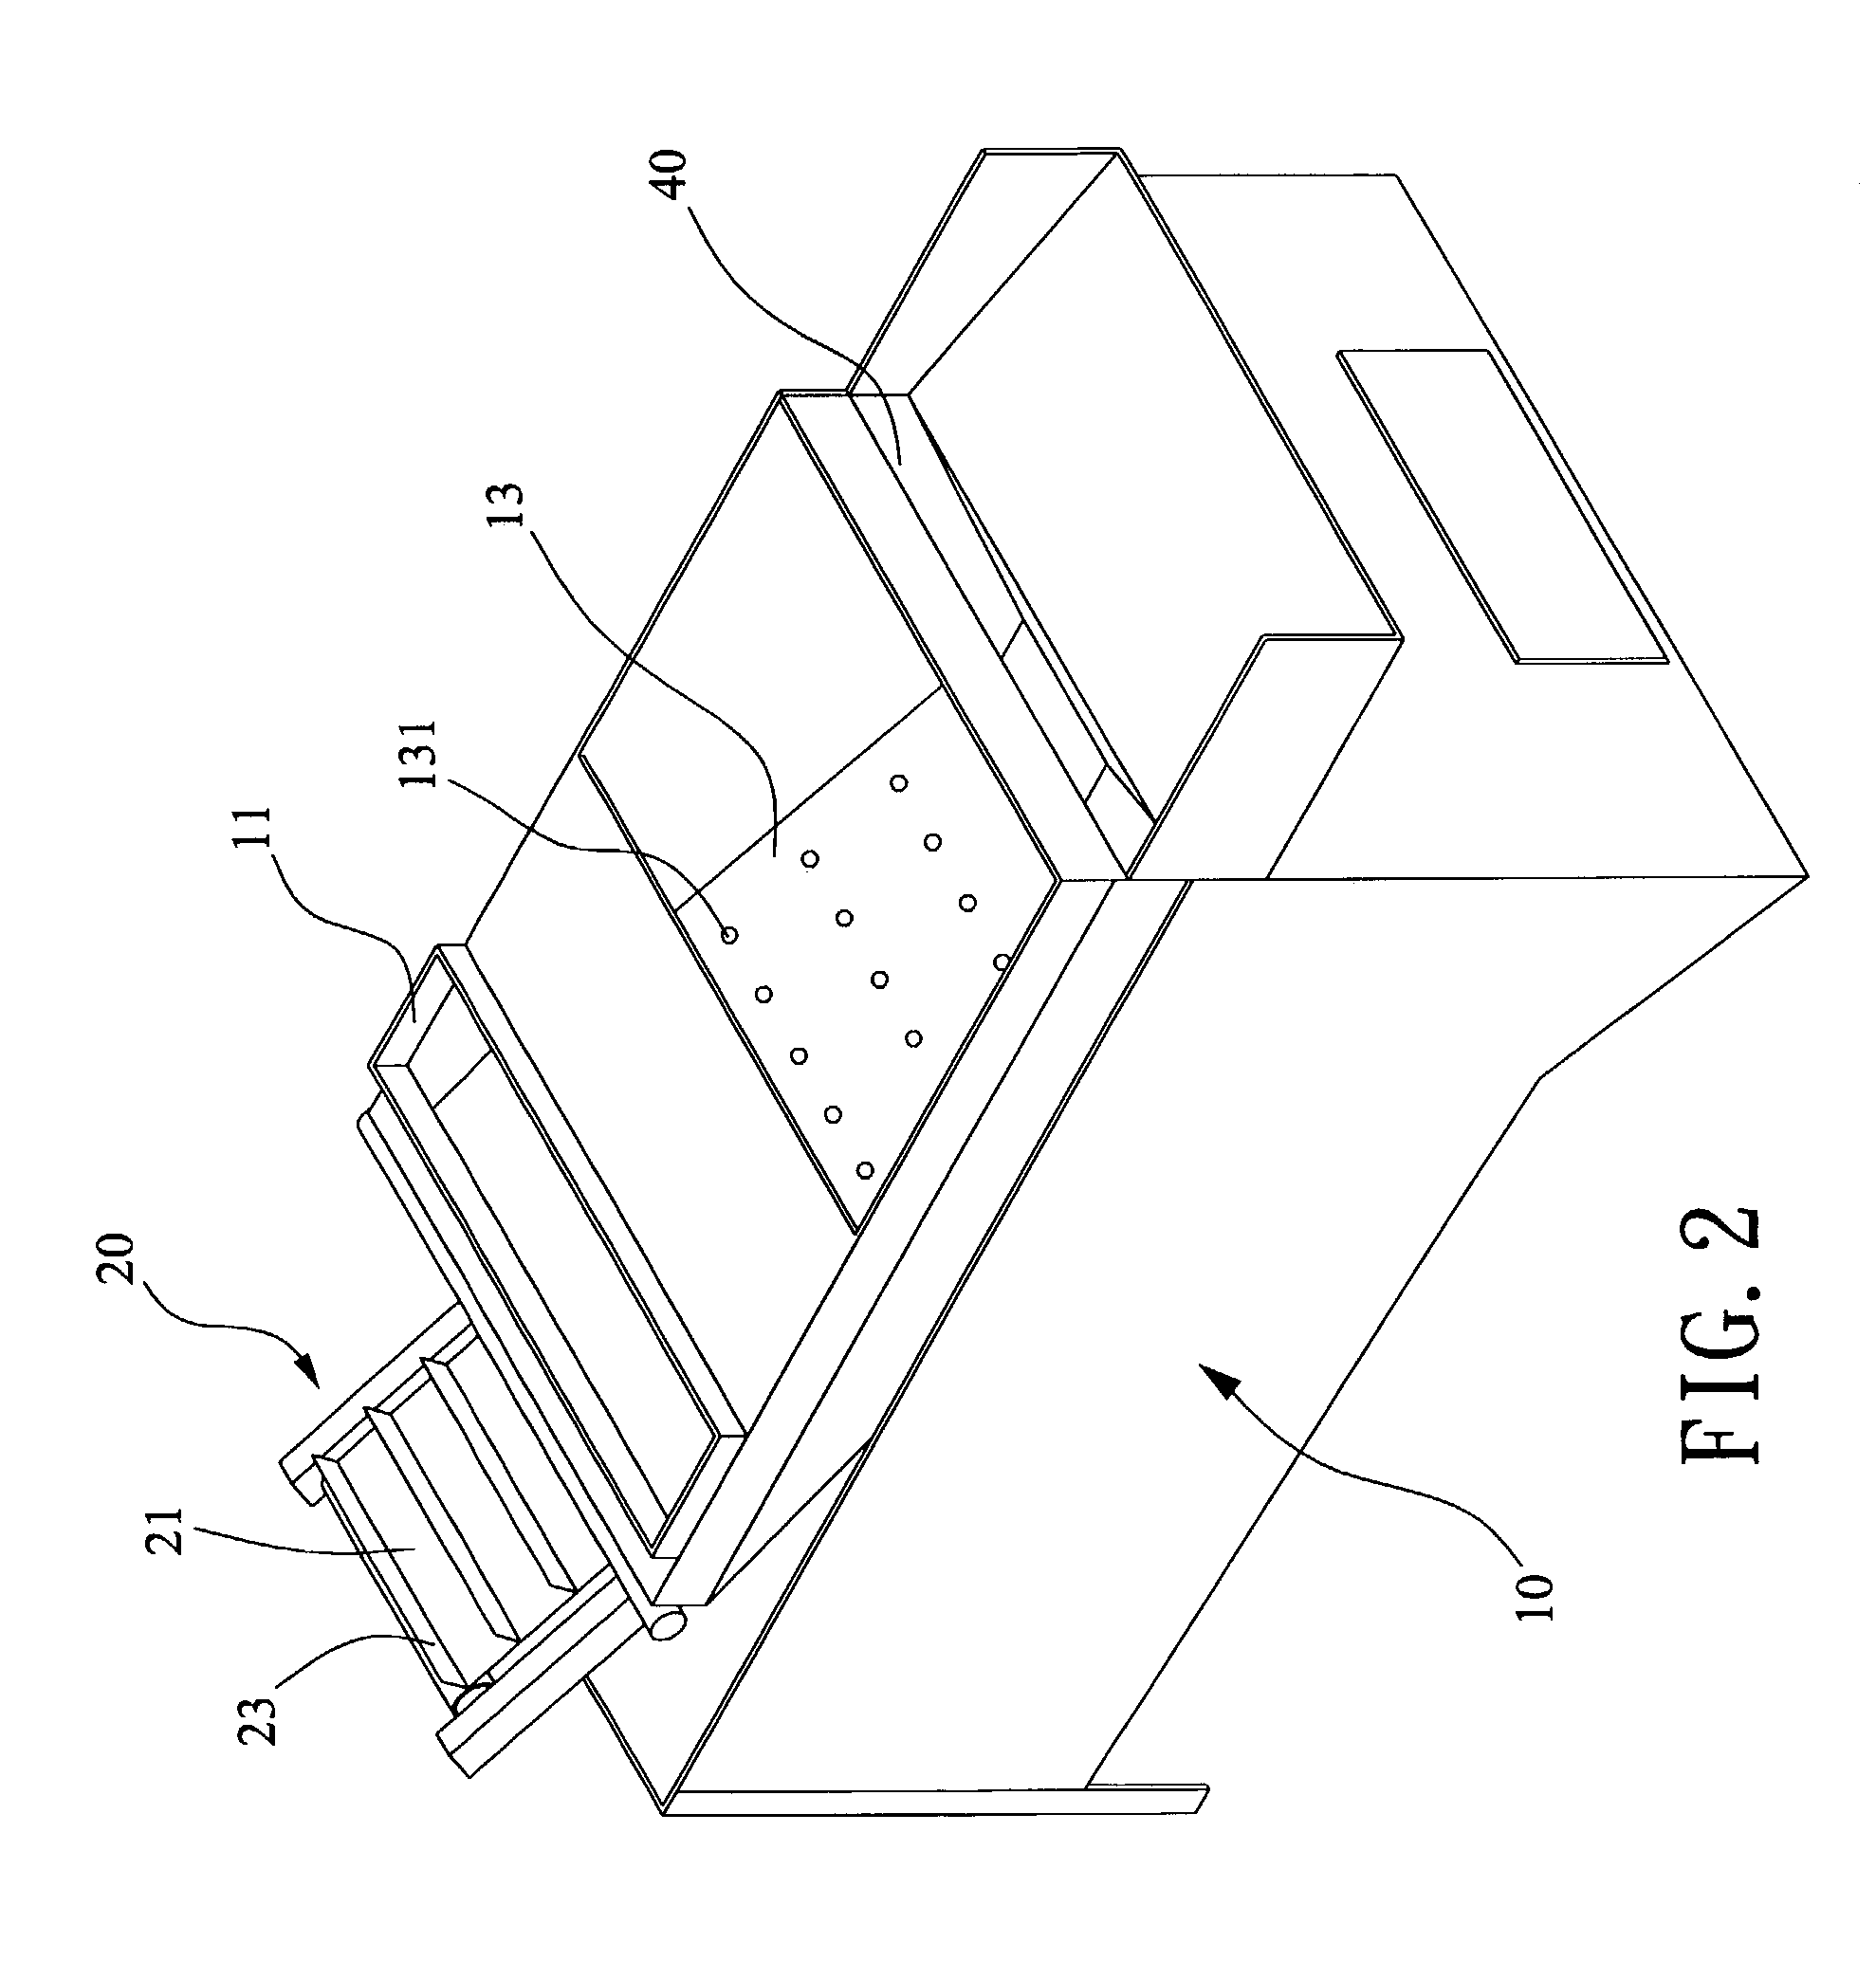 Apparatus and method of separating heavy materials in garbage from light ones and classifying the heavy garbage for collection